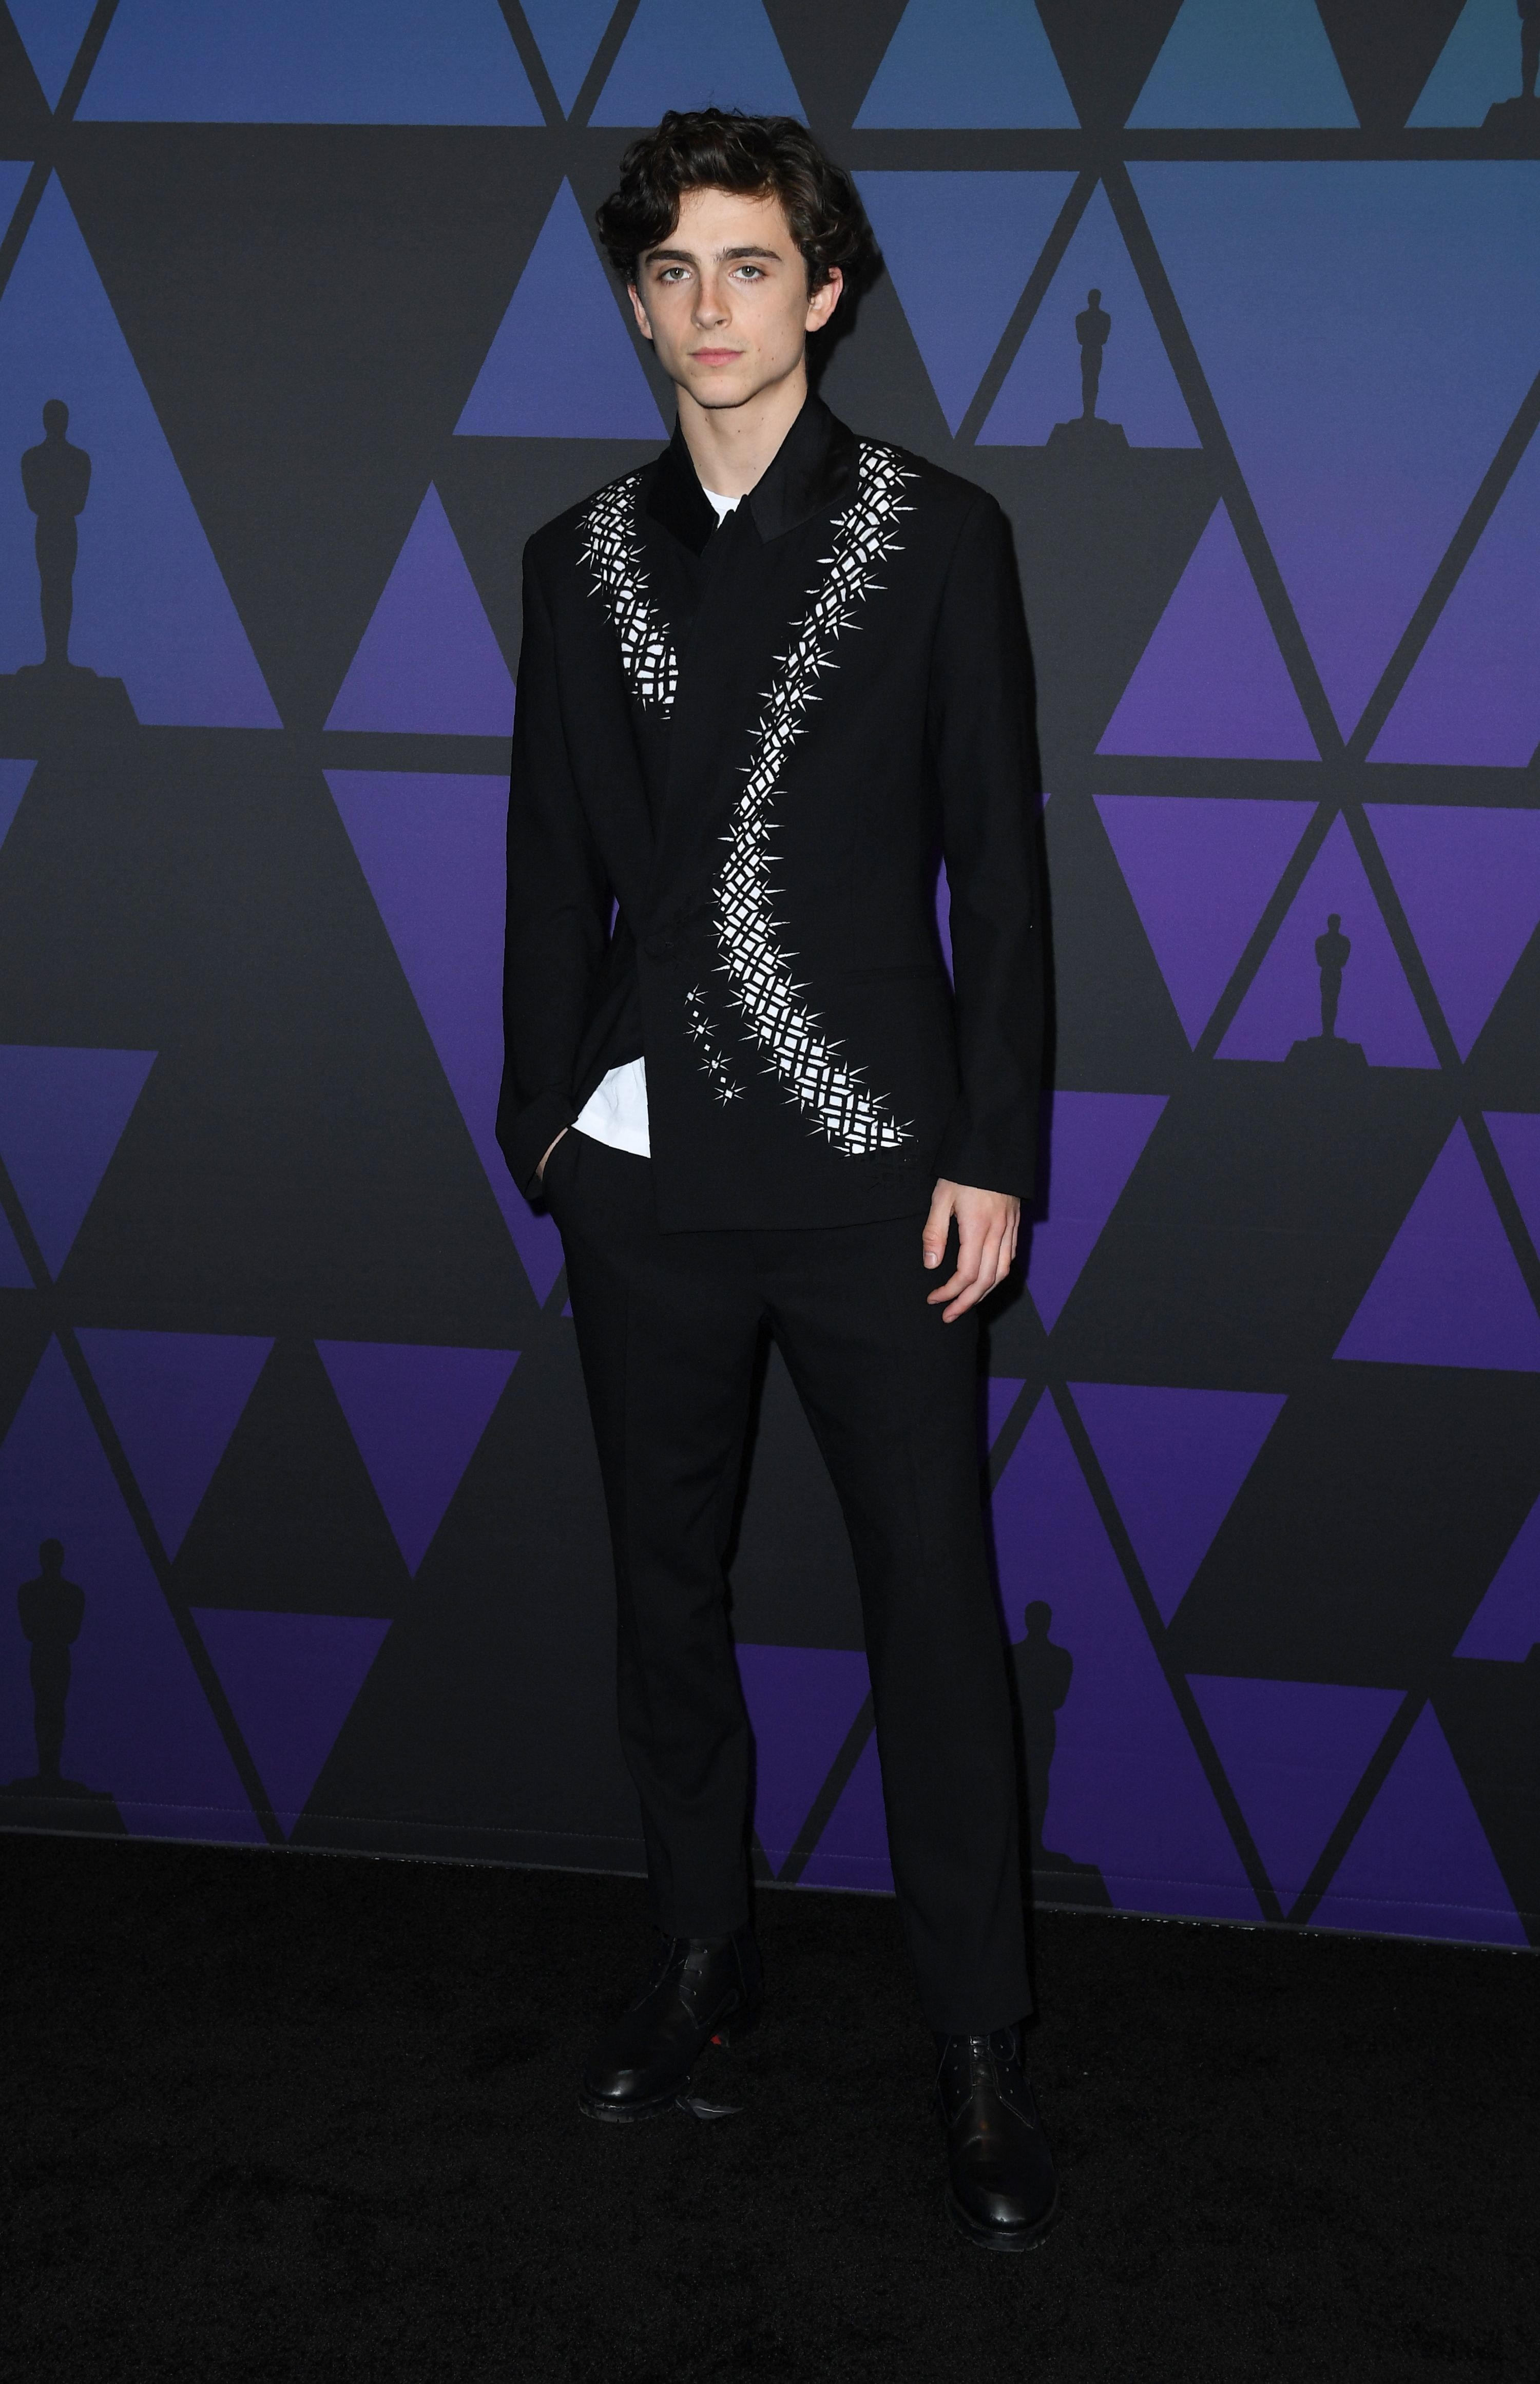 Timothée wears a black suit with a print of a white snake that wraps around the neck